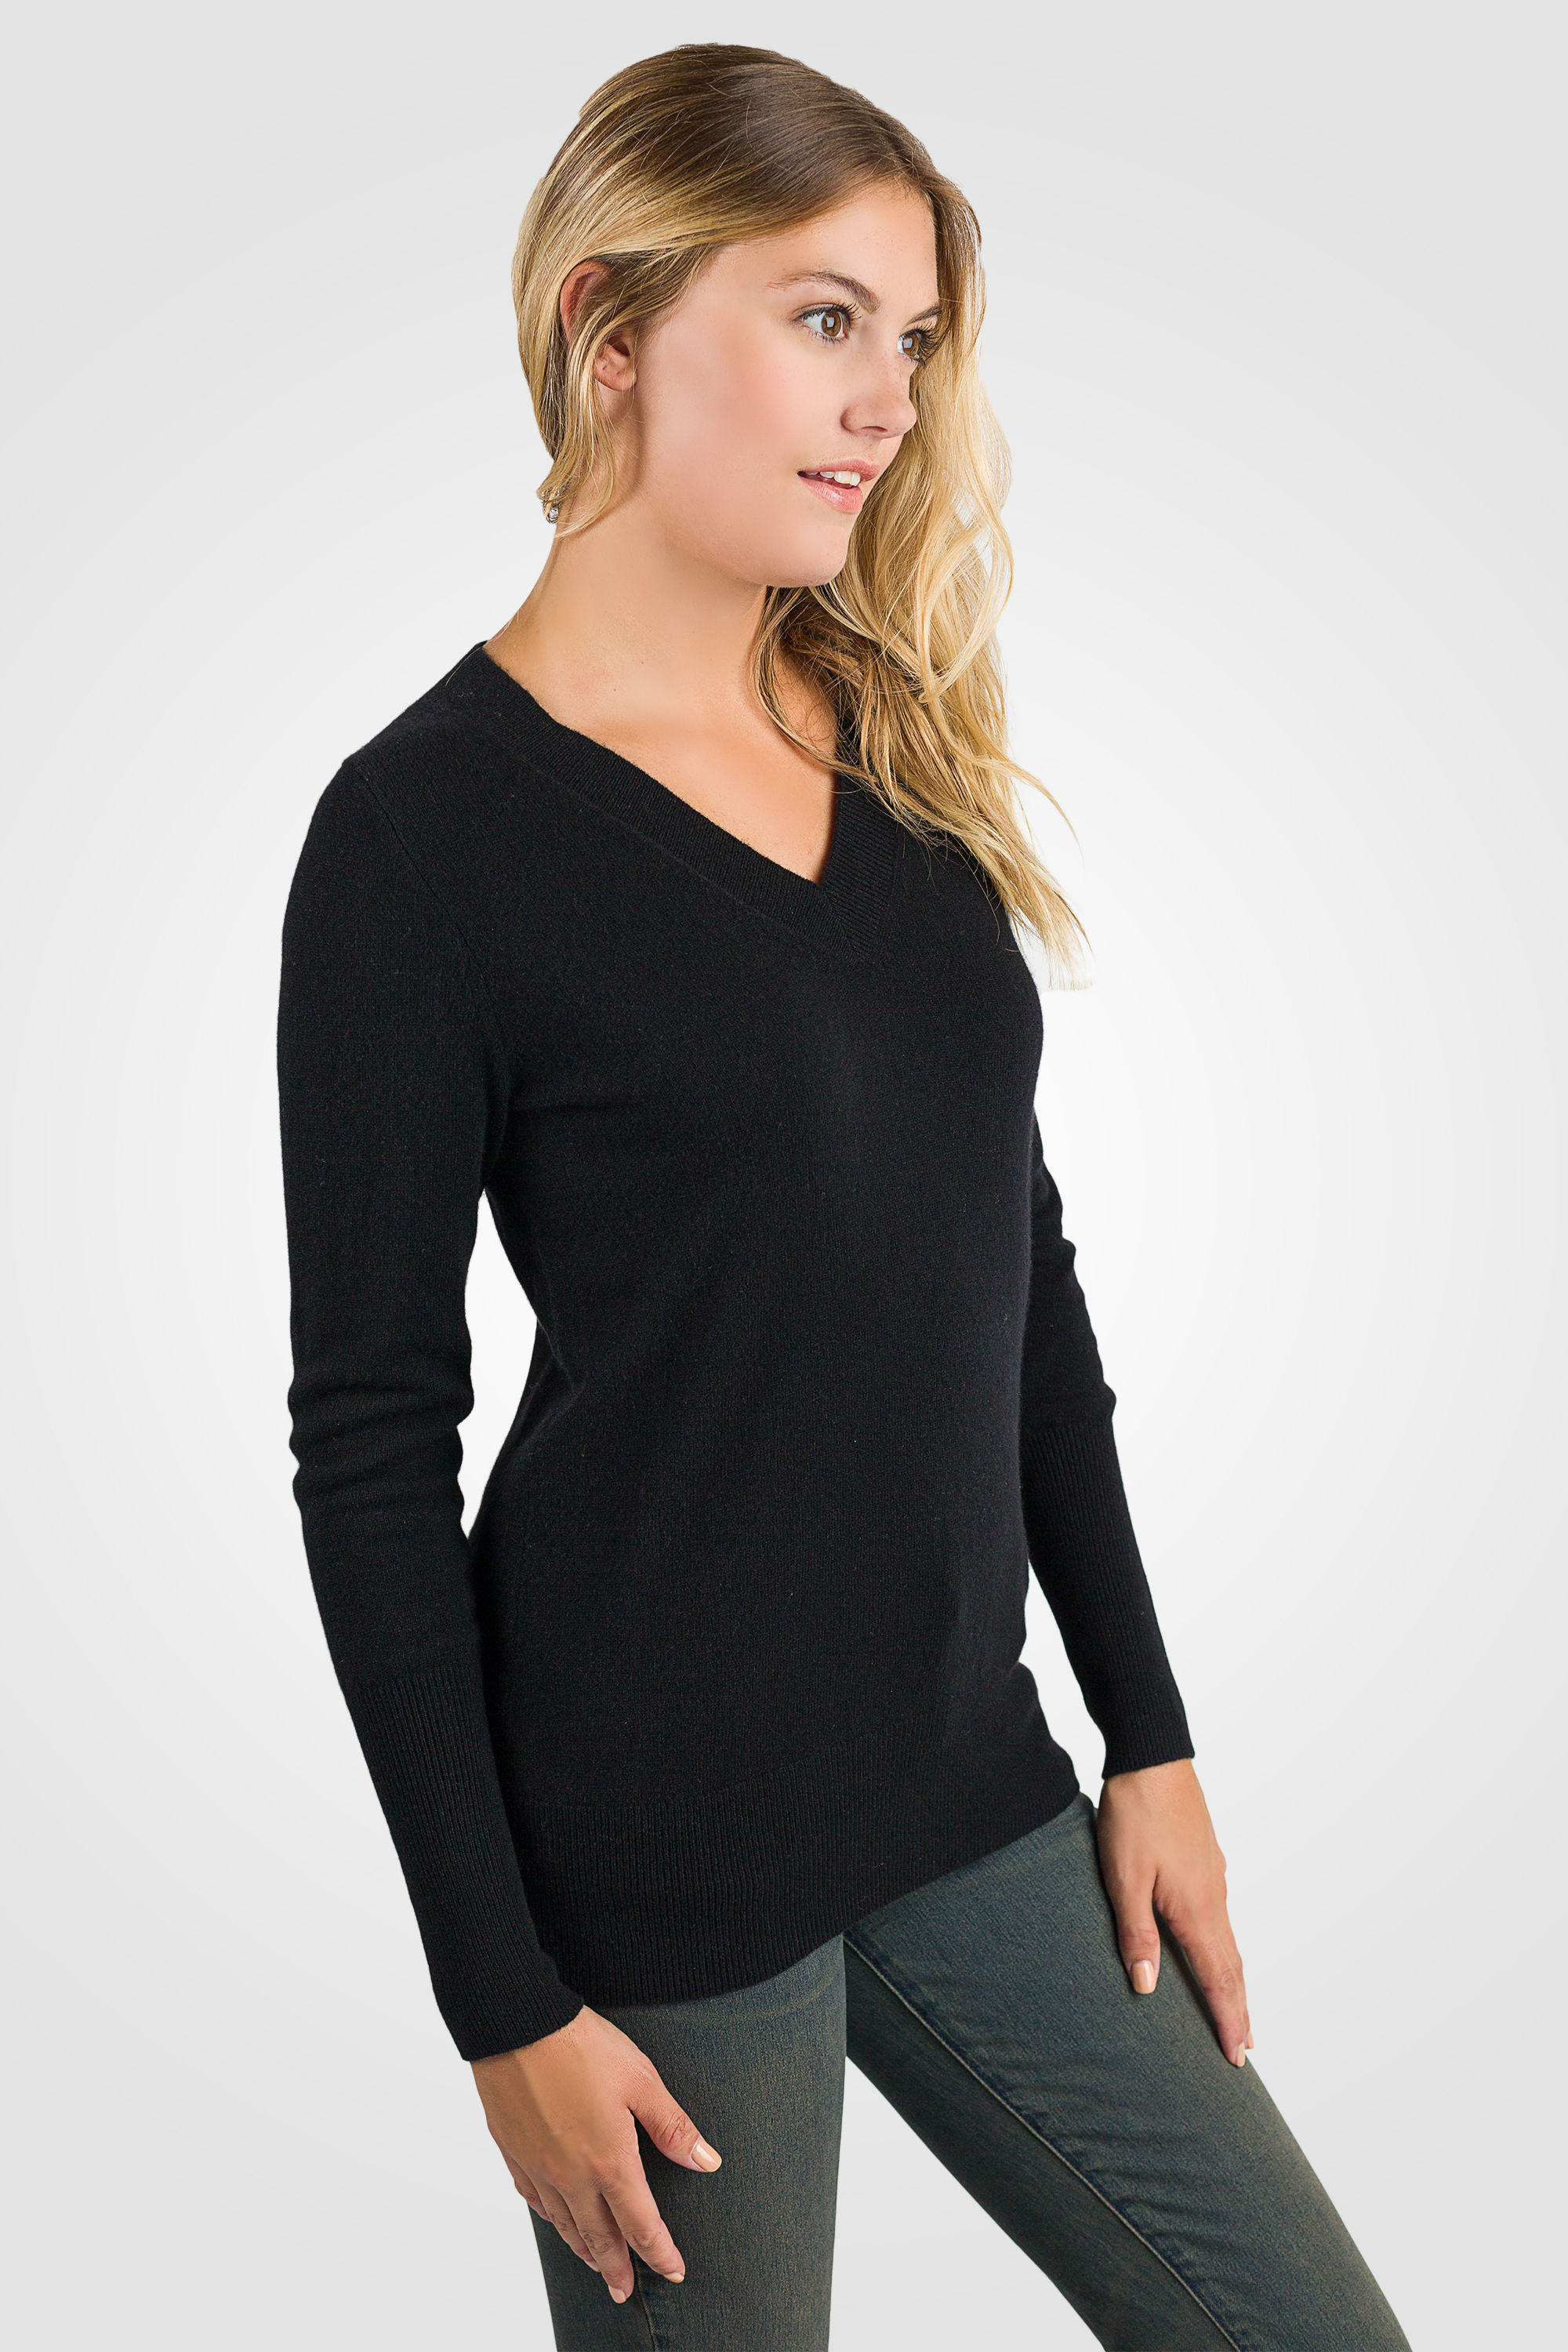 Black cashmere sweater ... black cashmere long sleeve ava v neck sweater right view ... IZAWRBS